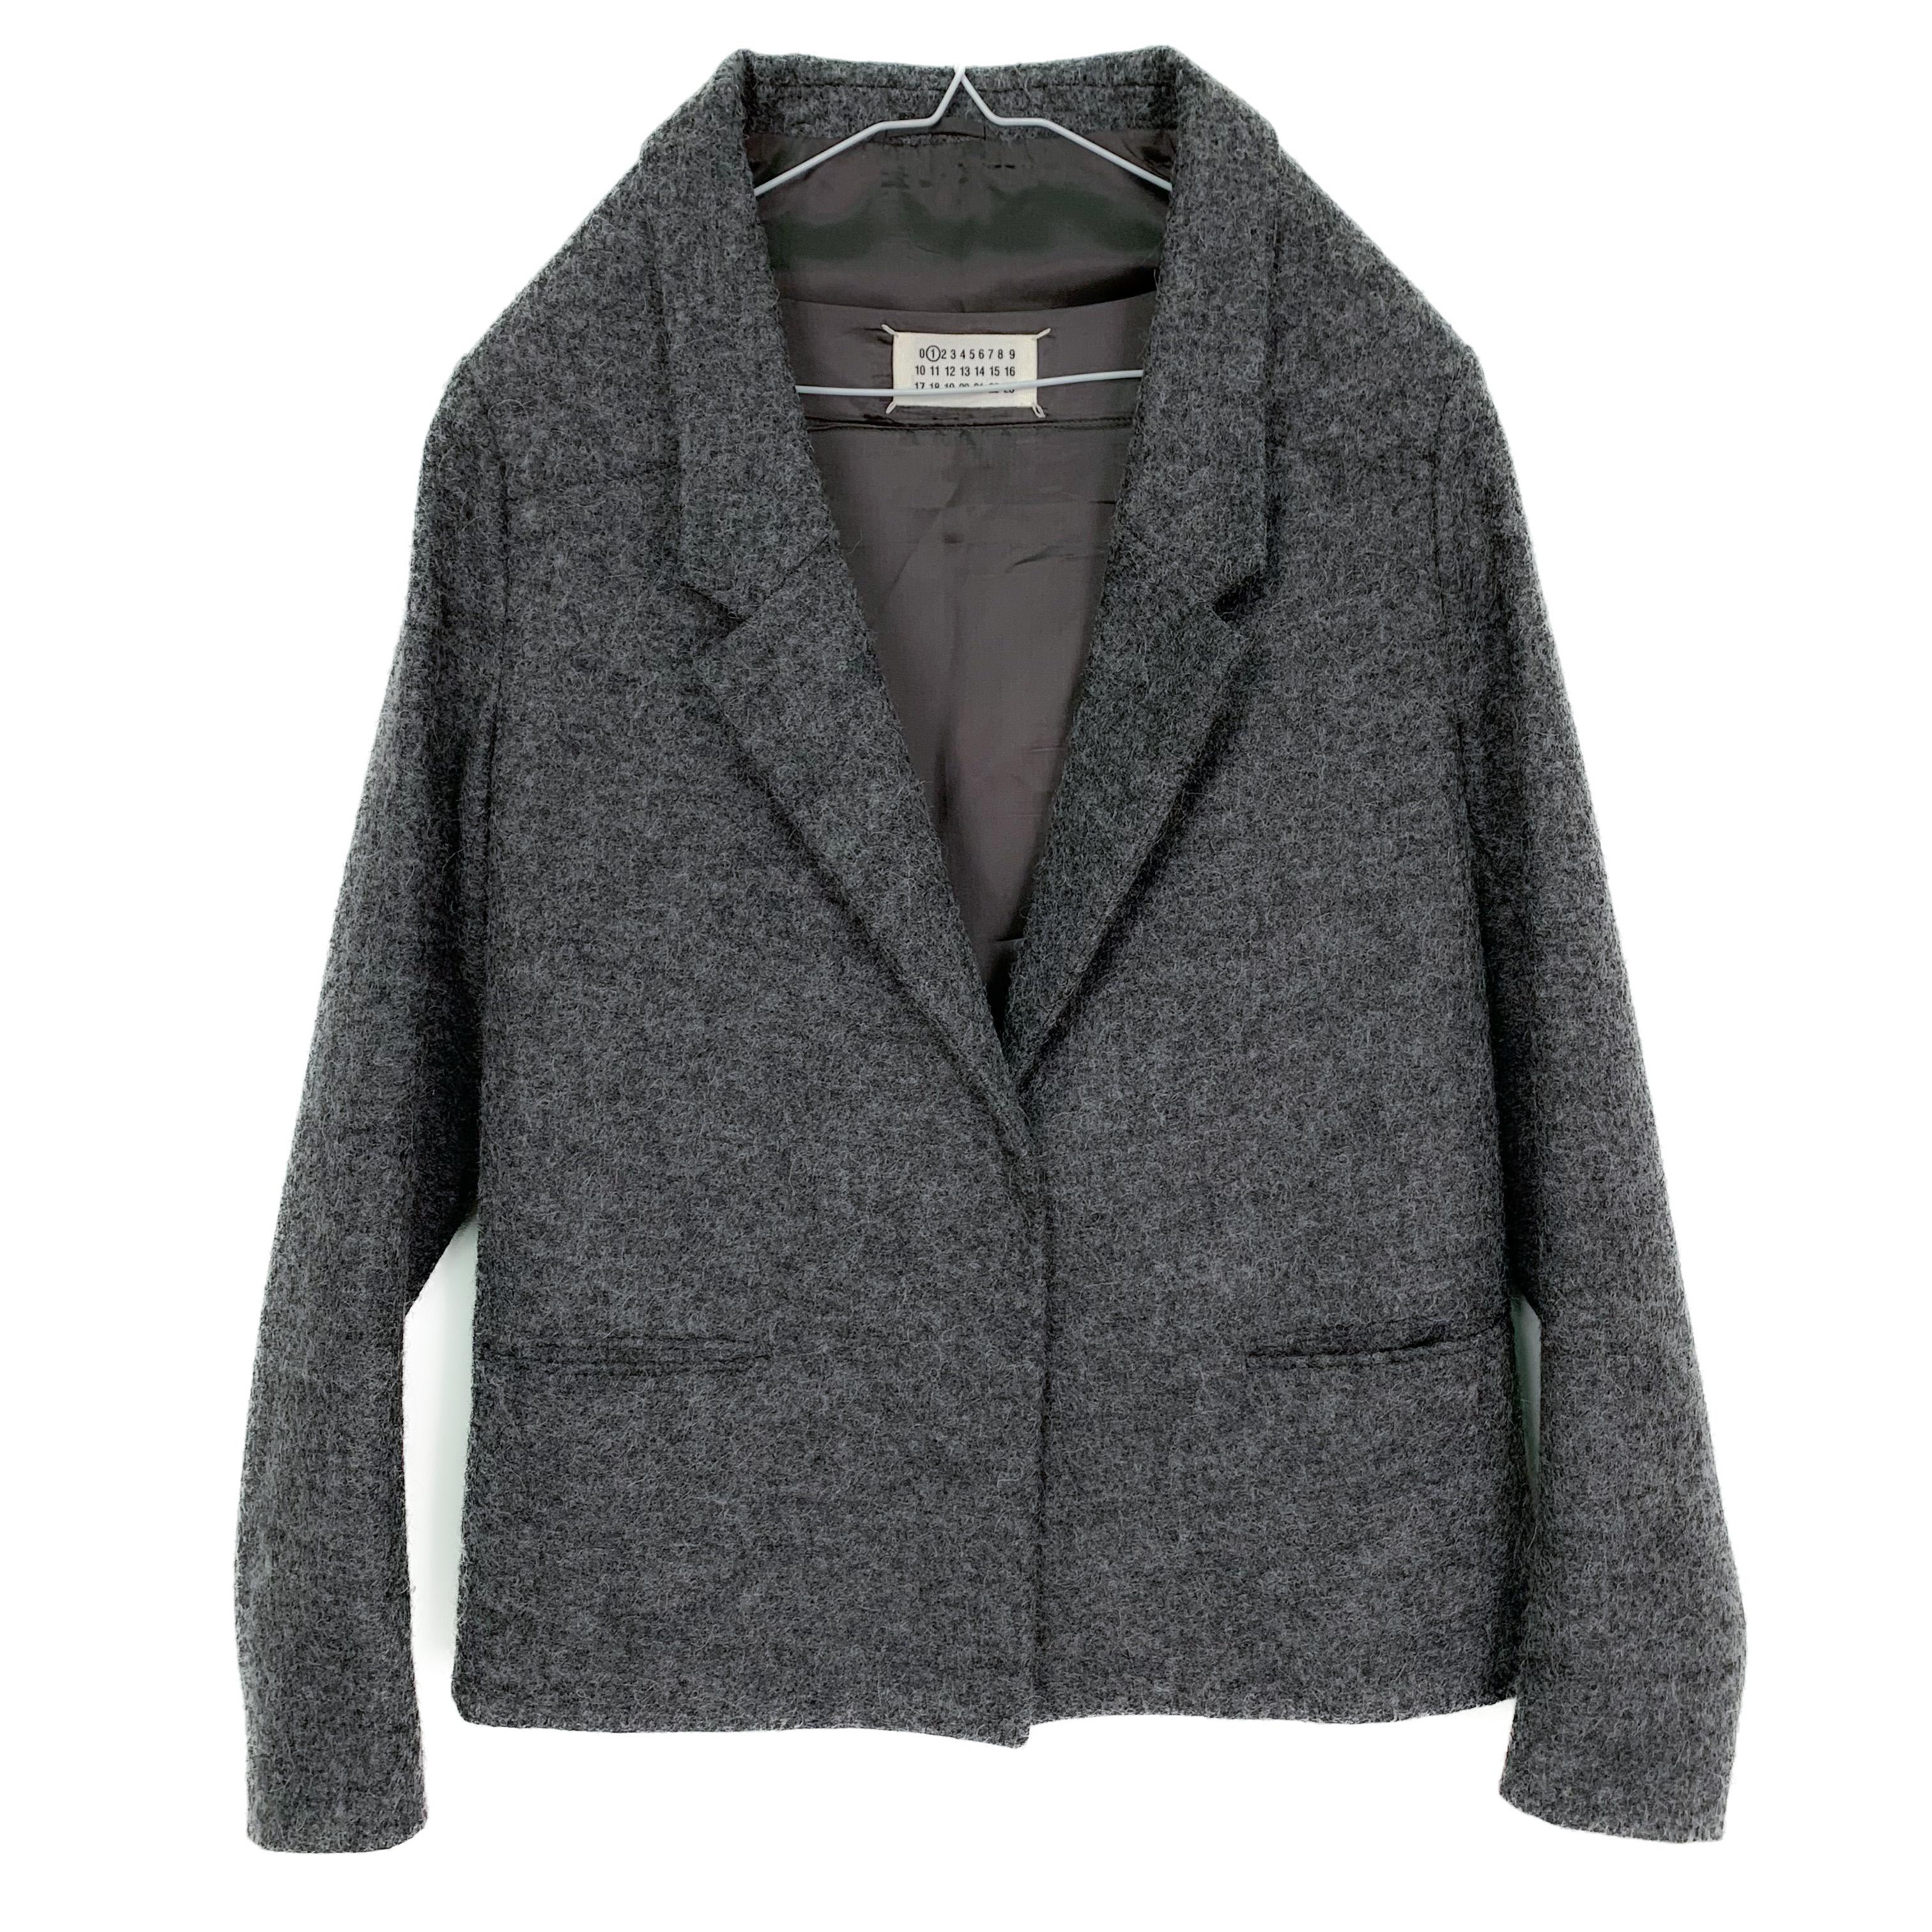 Fall 2010 mr. Margiela's very last RTW collection grey wool deconstructed blazer For Sale 6